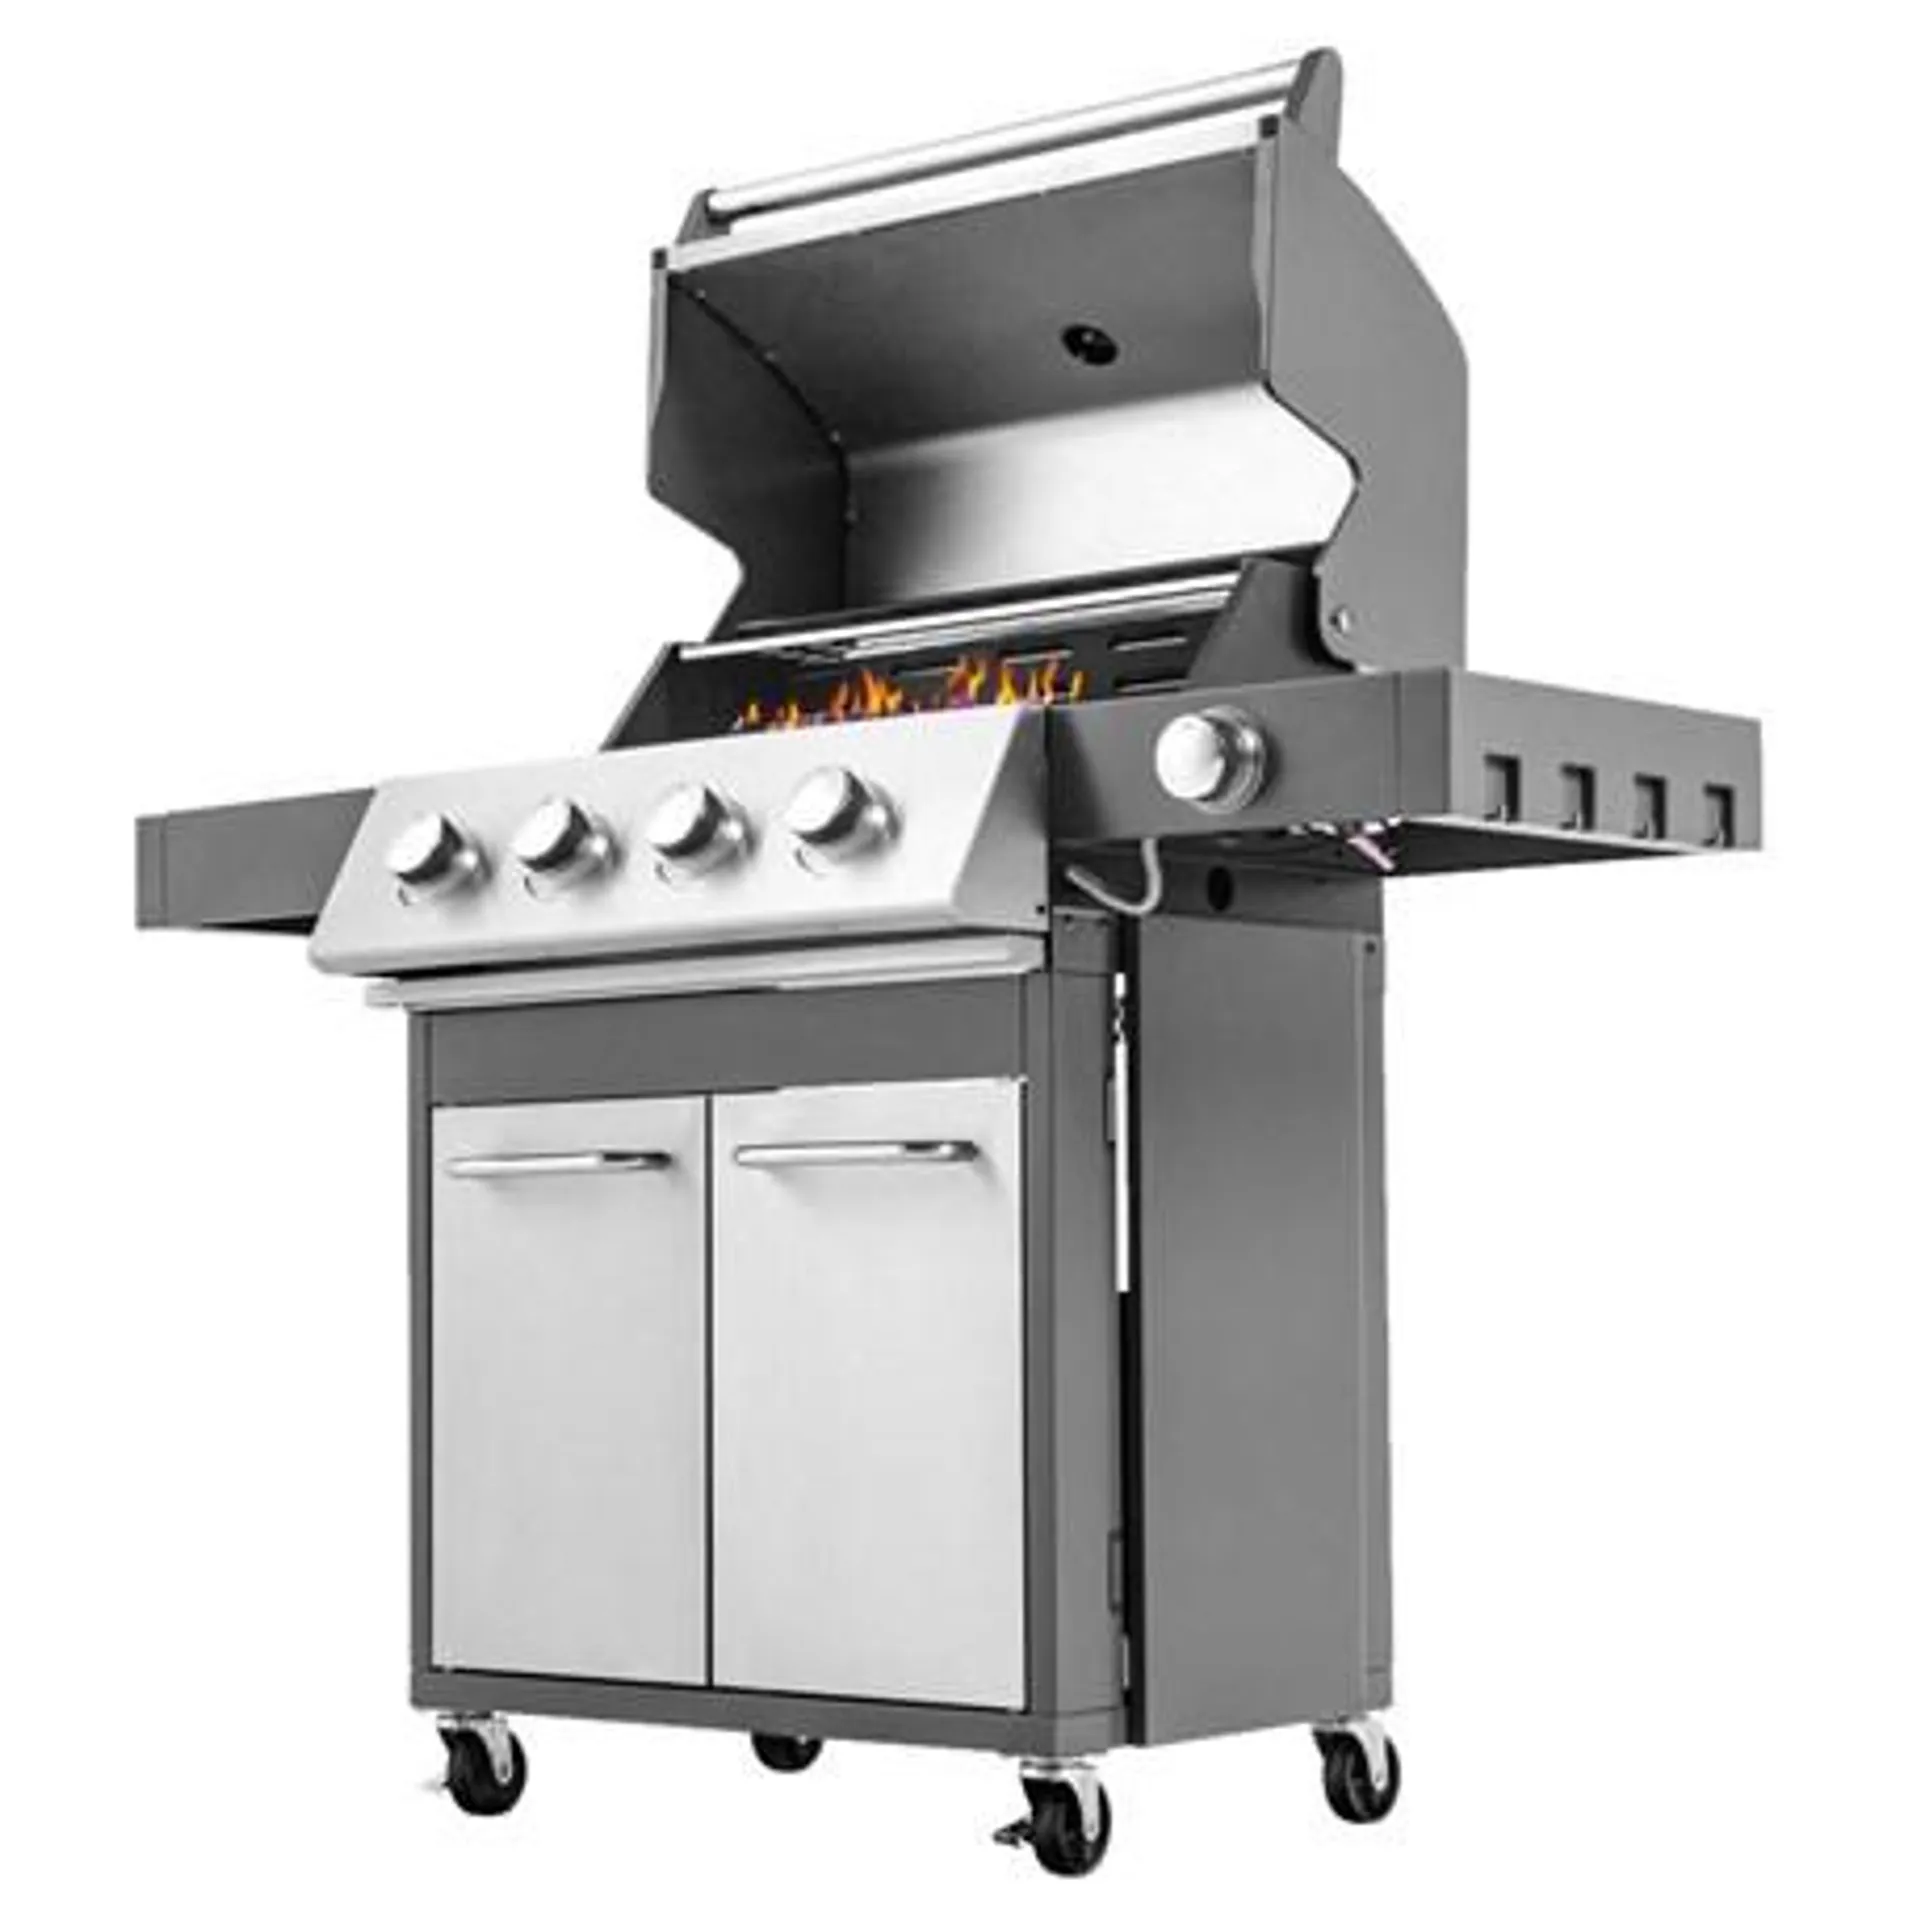 Gasolgrill Steely King 6342